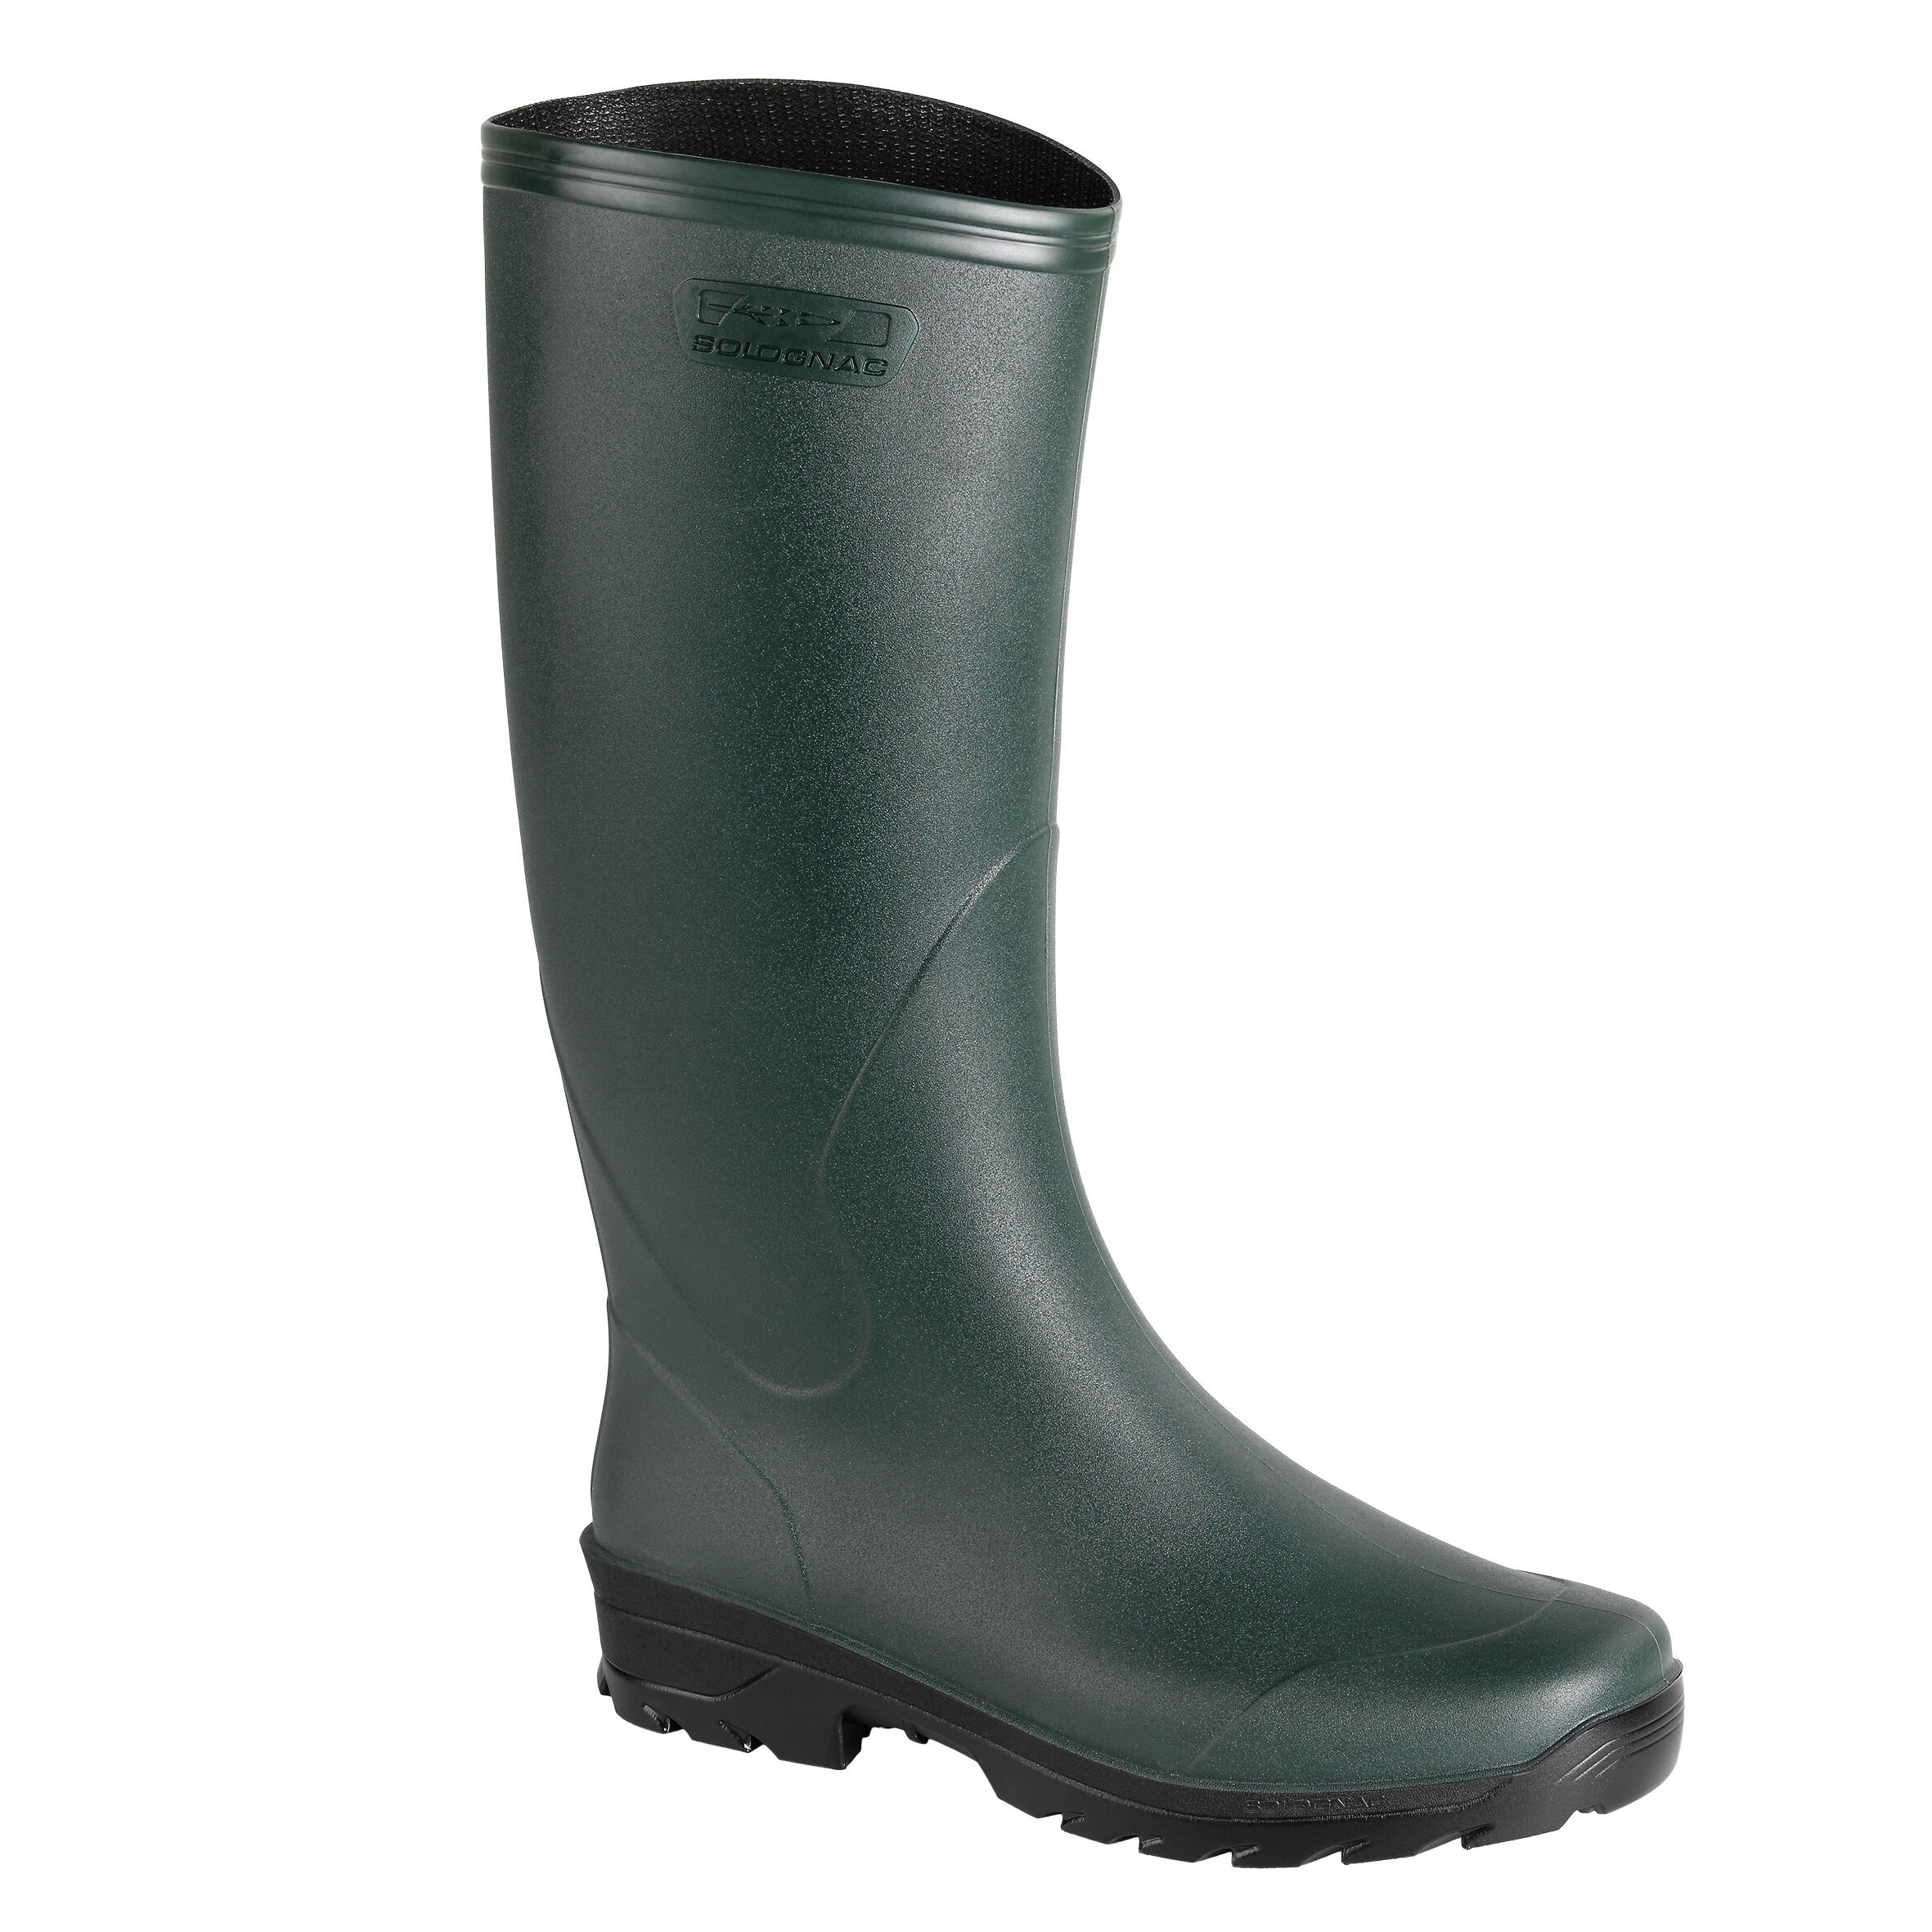 Buy Long Gumboots for Monsoon Online at 